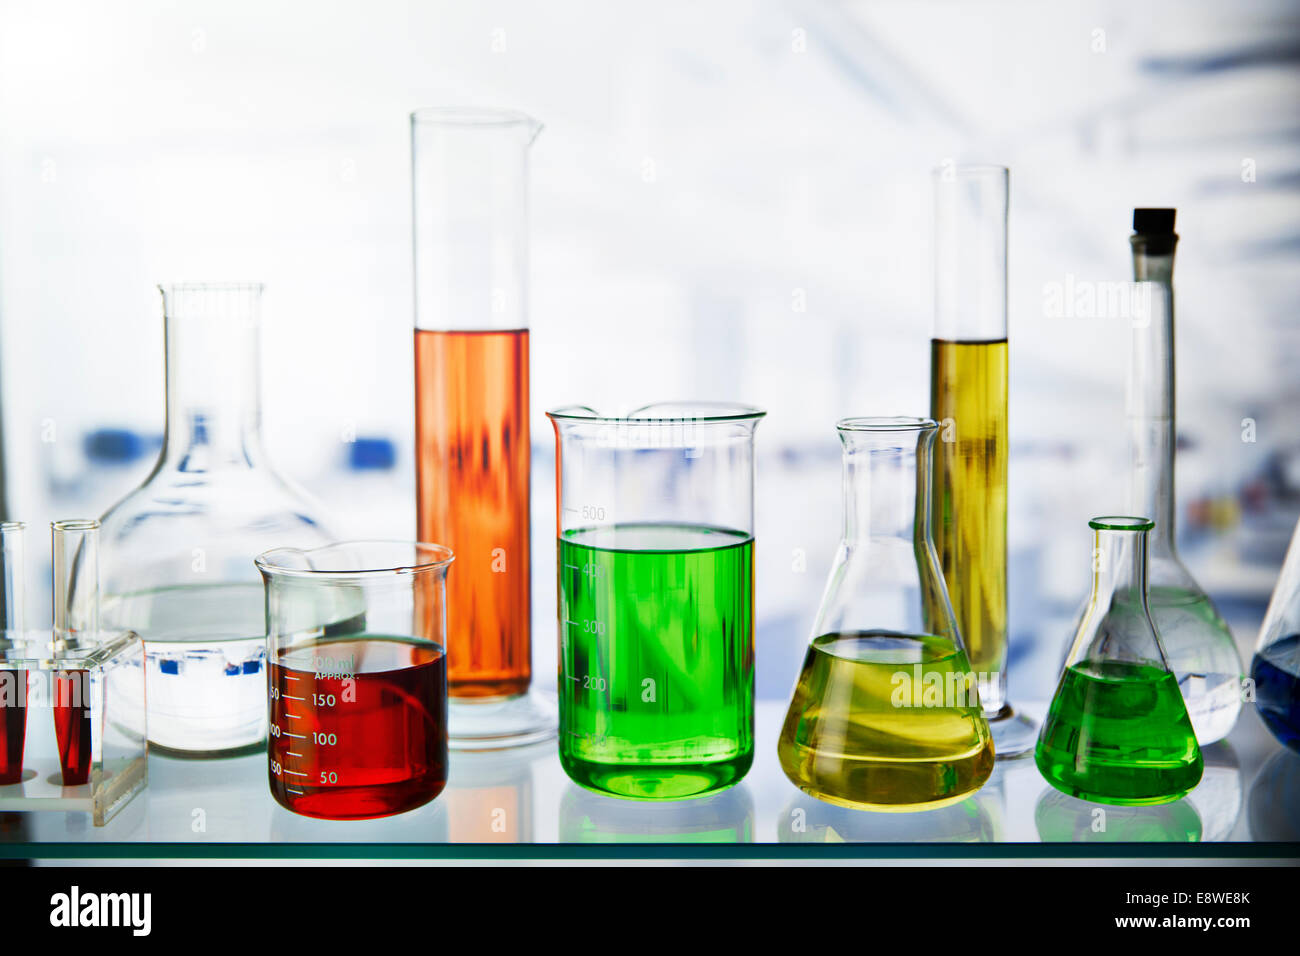 Beakers of various solutions on shelf in lab Stock Photo